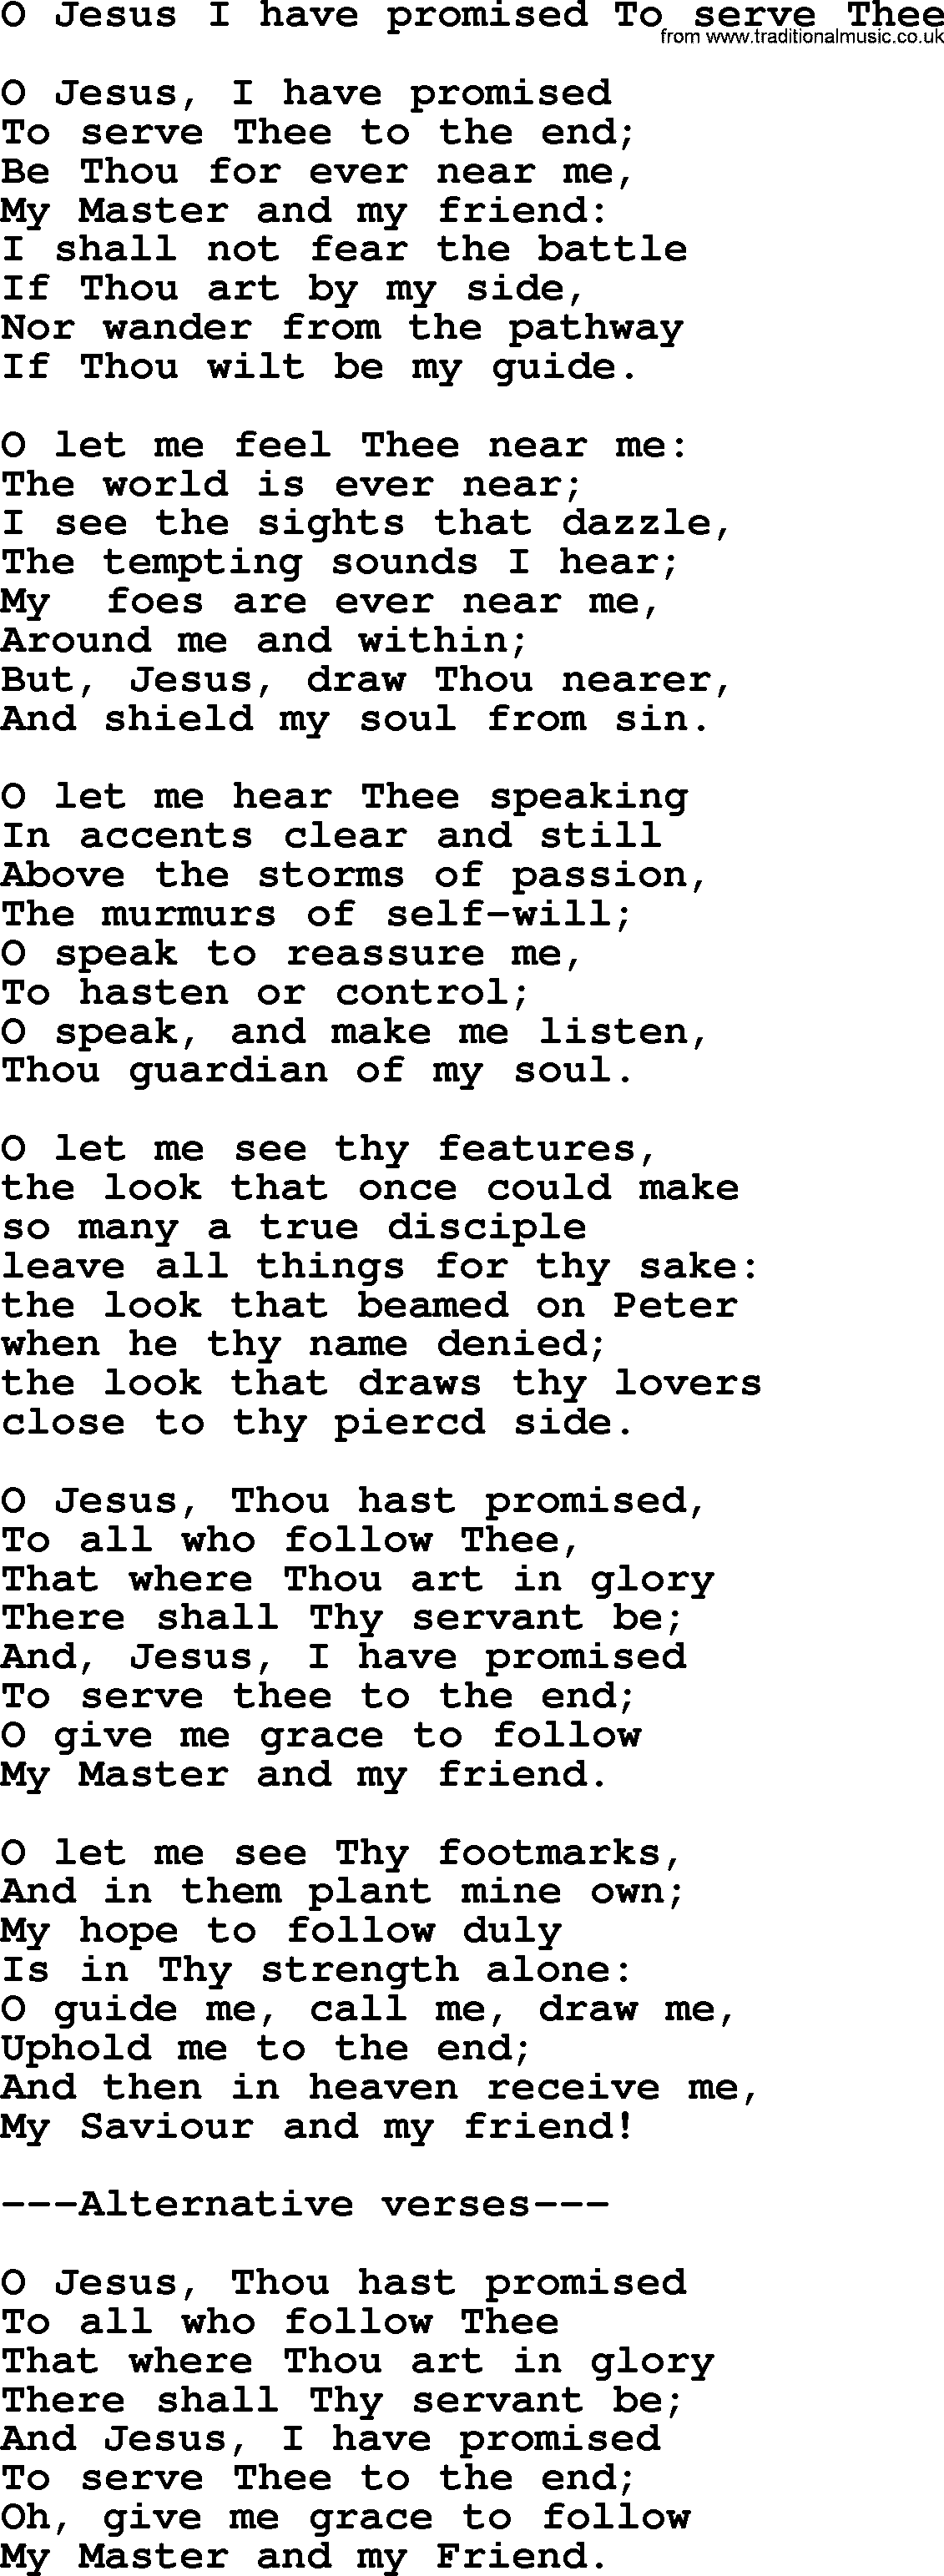 Presbyterian Hymns collection, Hymn: O Jesus I Have Promised To Serve Thee, lyrics and PDF